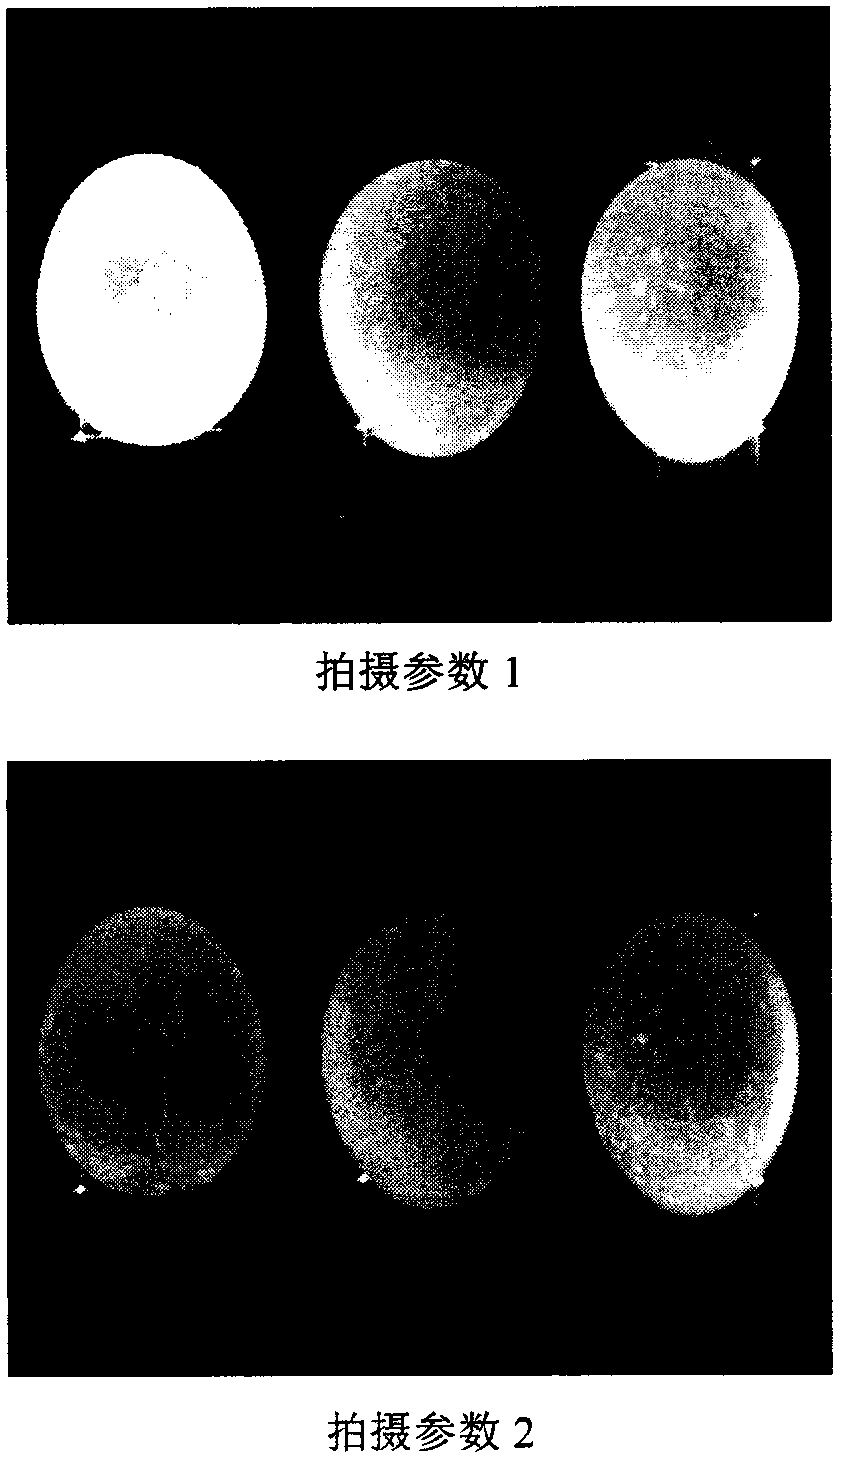 Dynamic egg image acquisition equipment